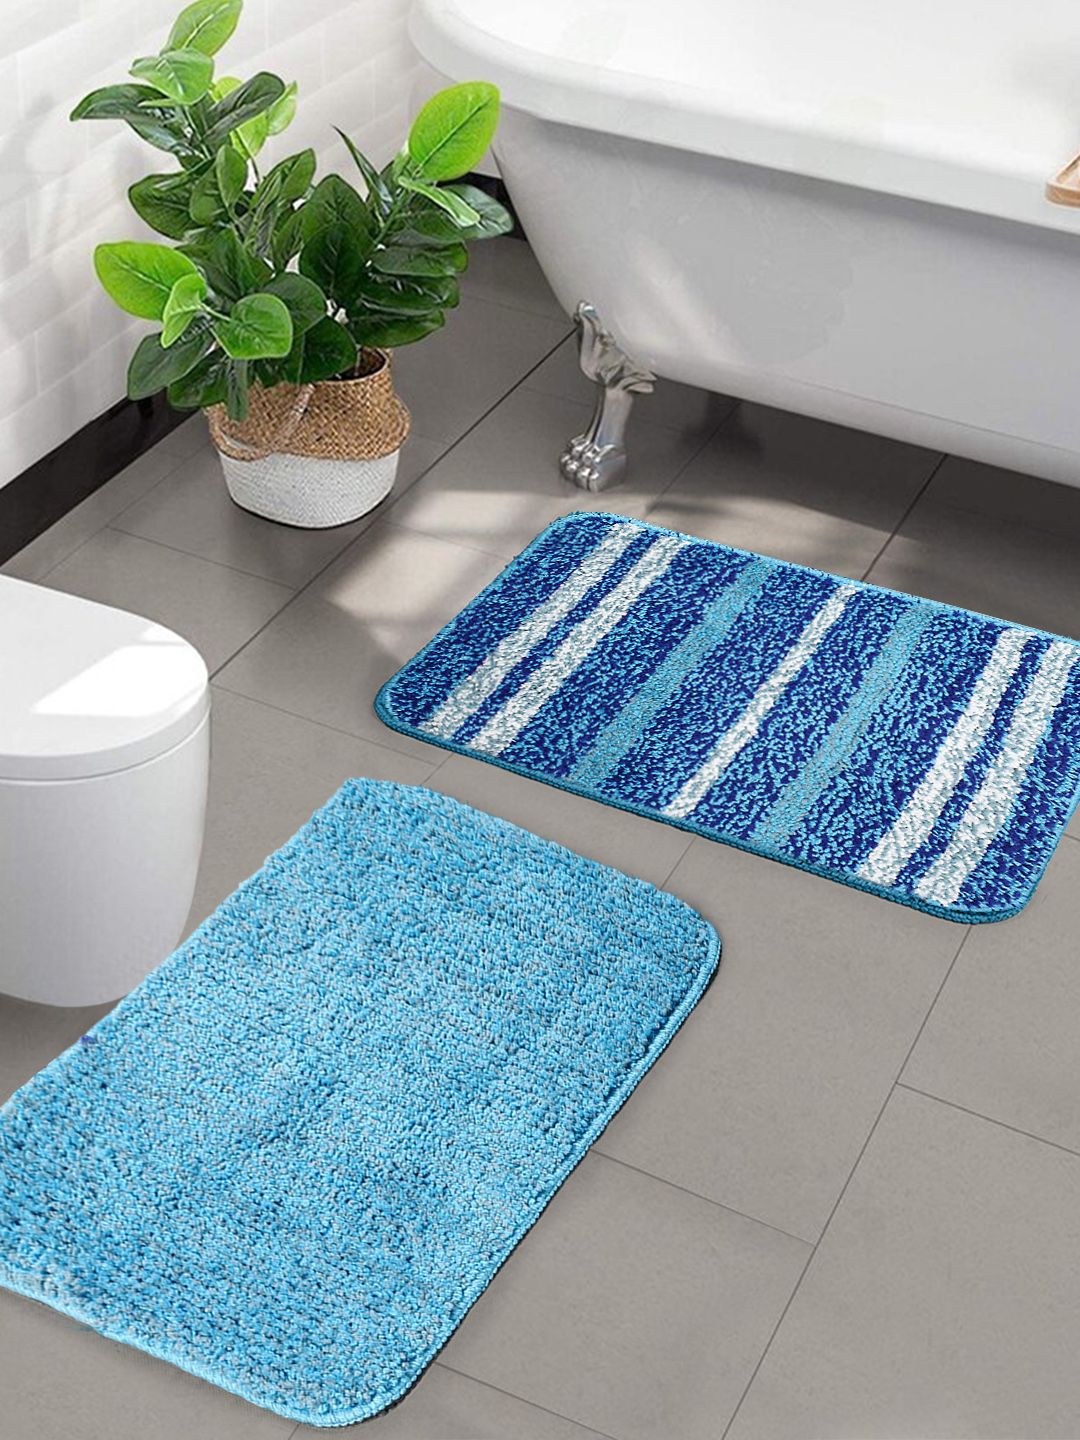 Saral Home Set Of 2 Blue & White Anti-Skid Bath Mats Price in India